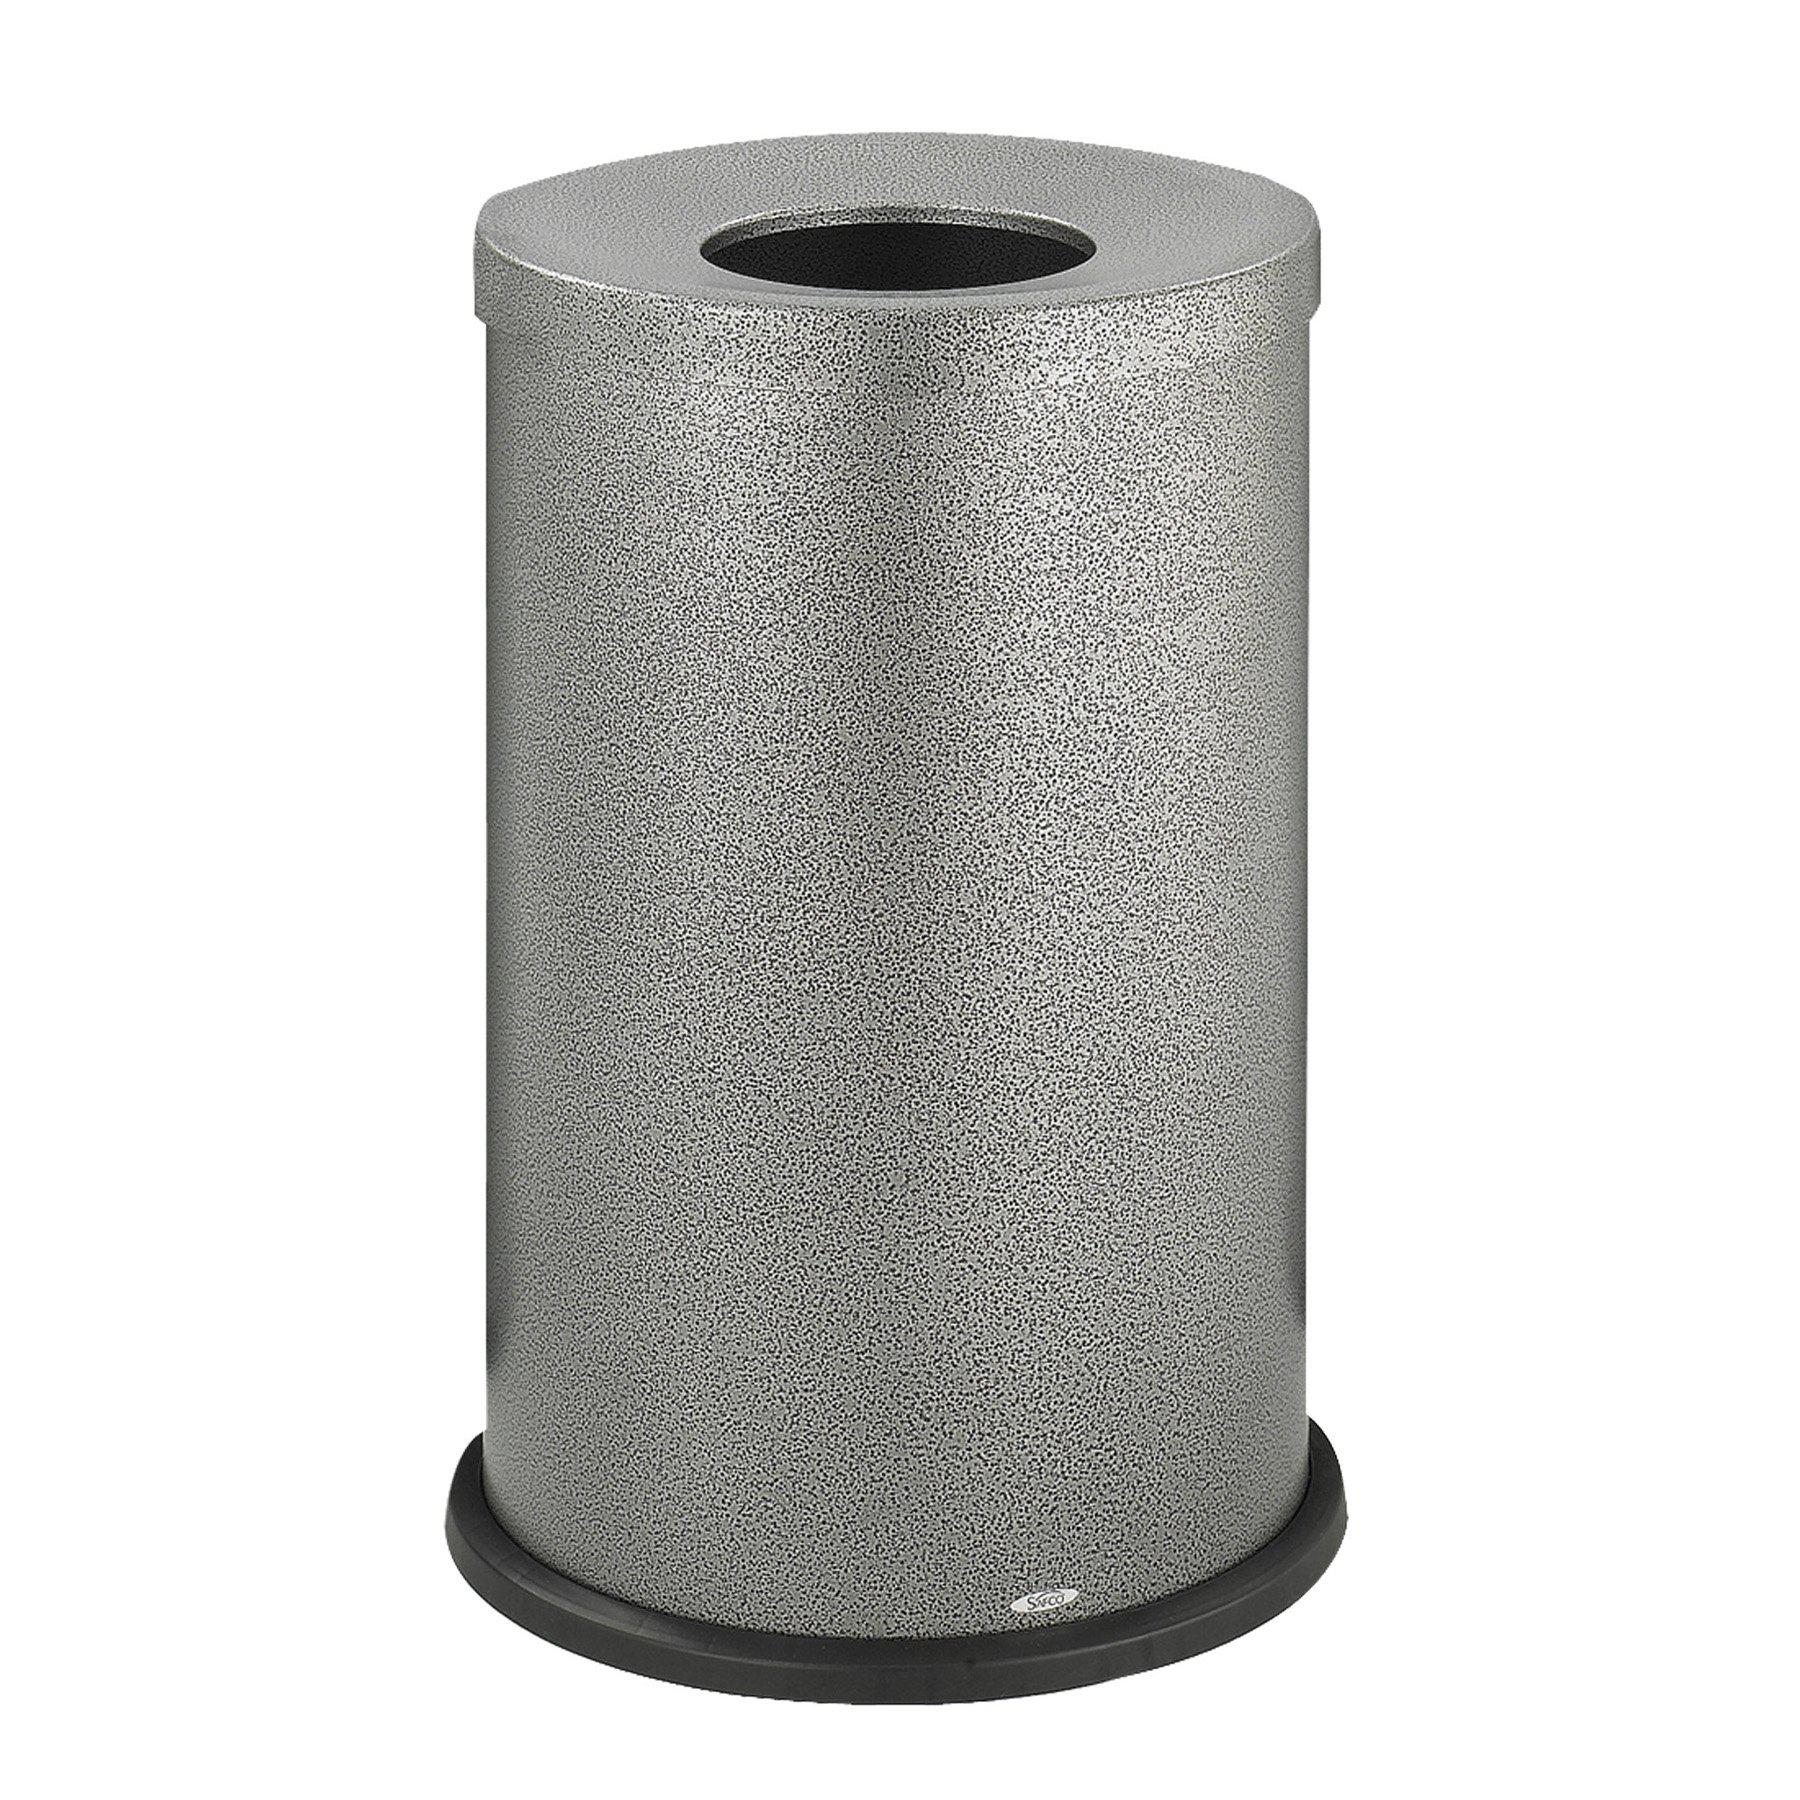 Black Speckle Open Top Receptacle, 35 Gallon, FREE SHIPPING